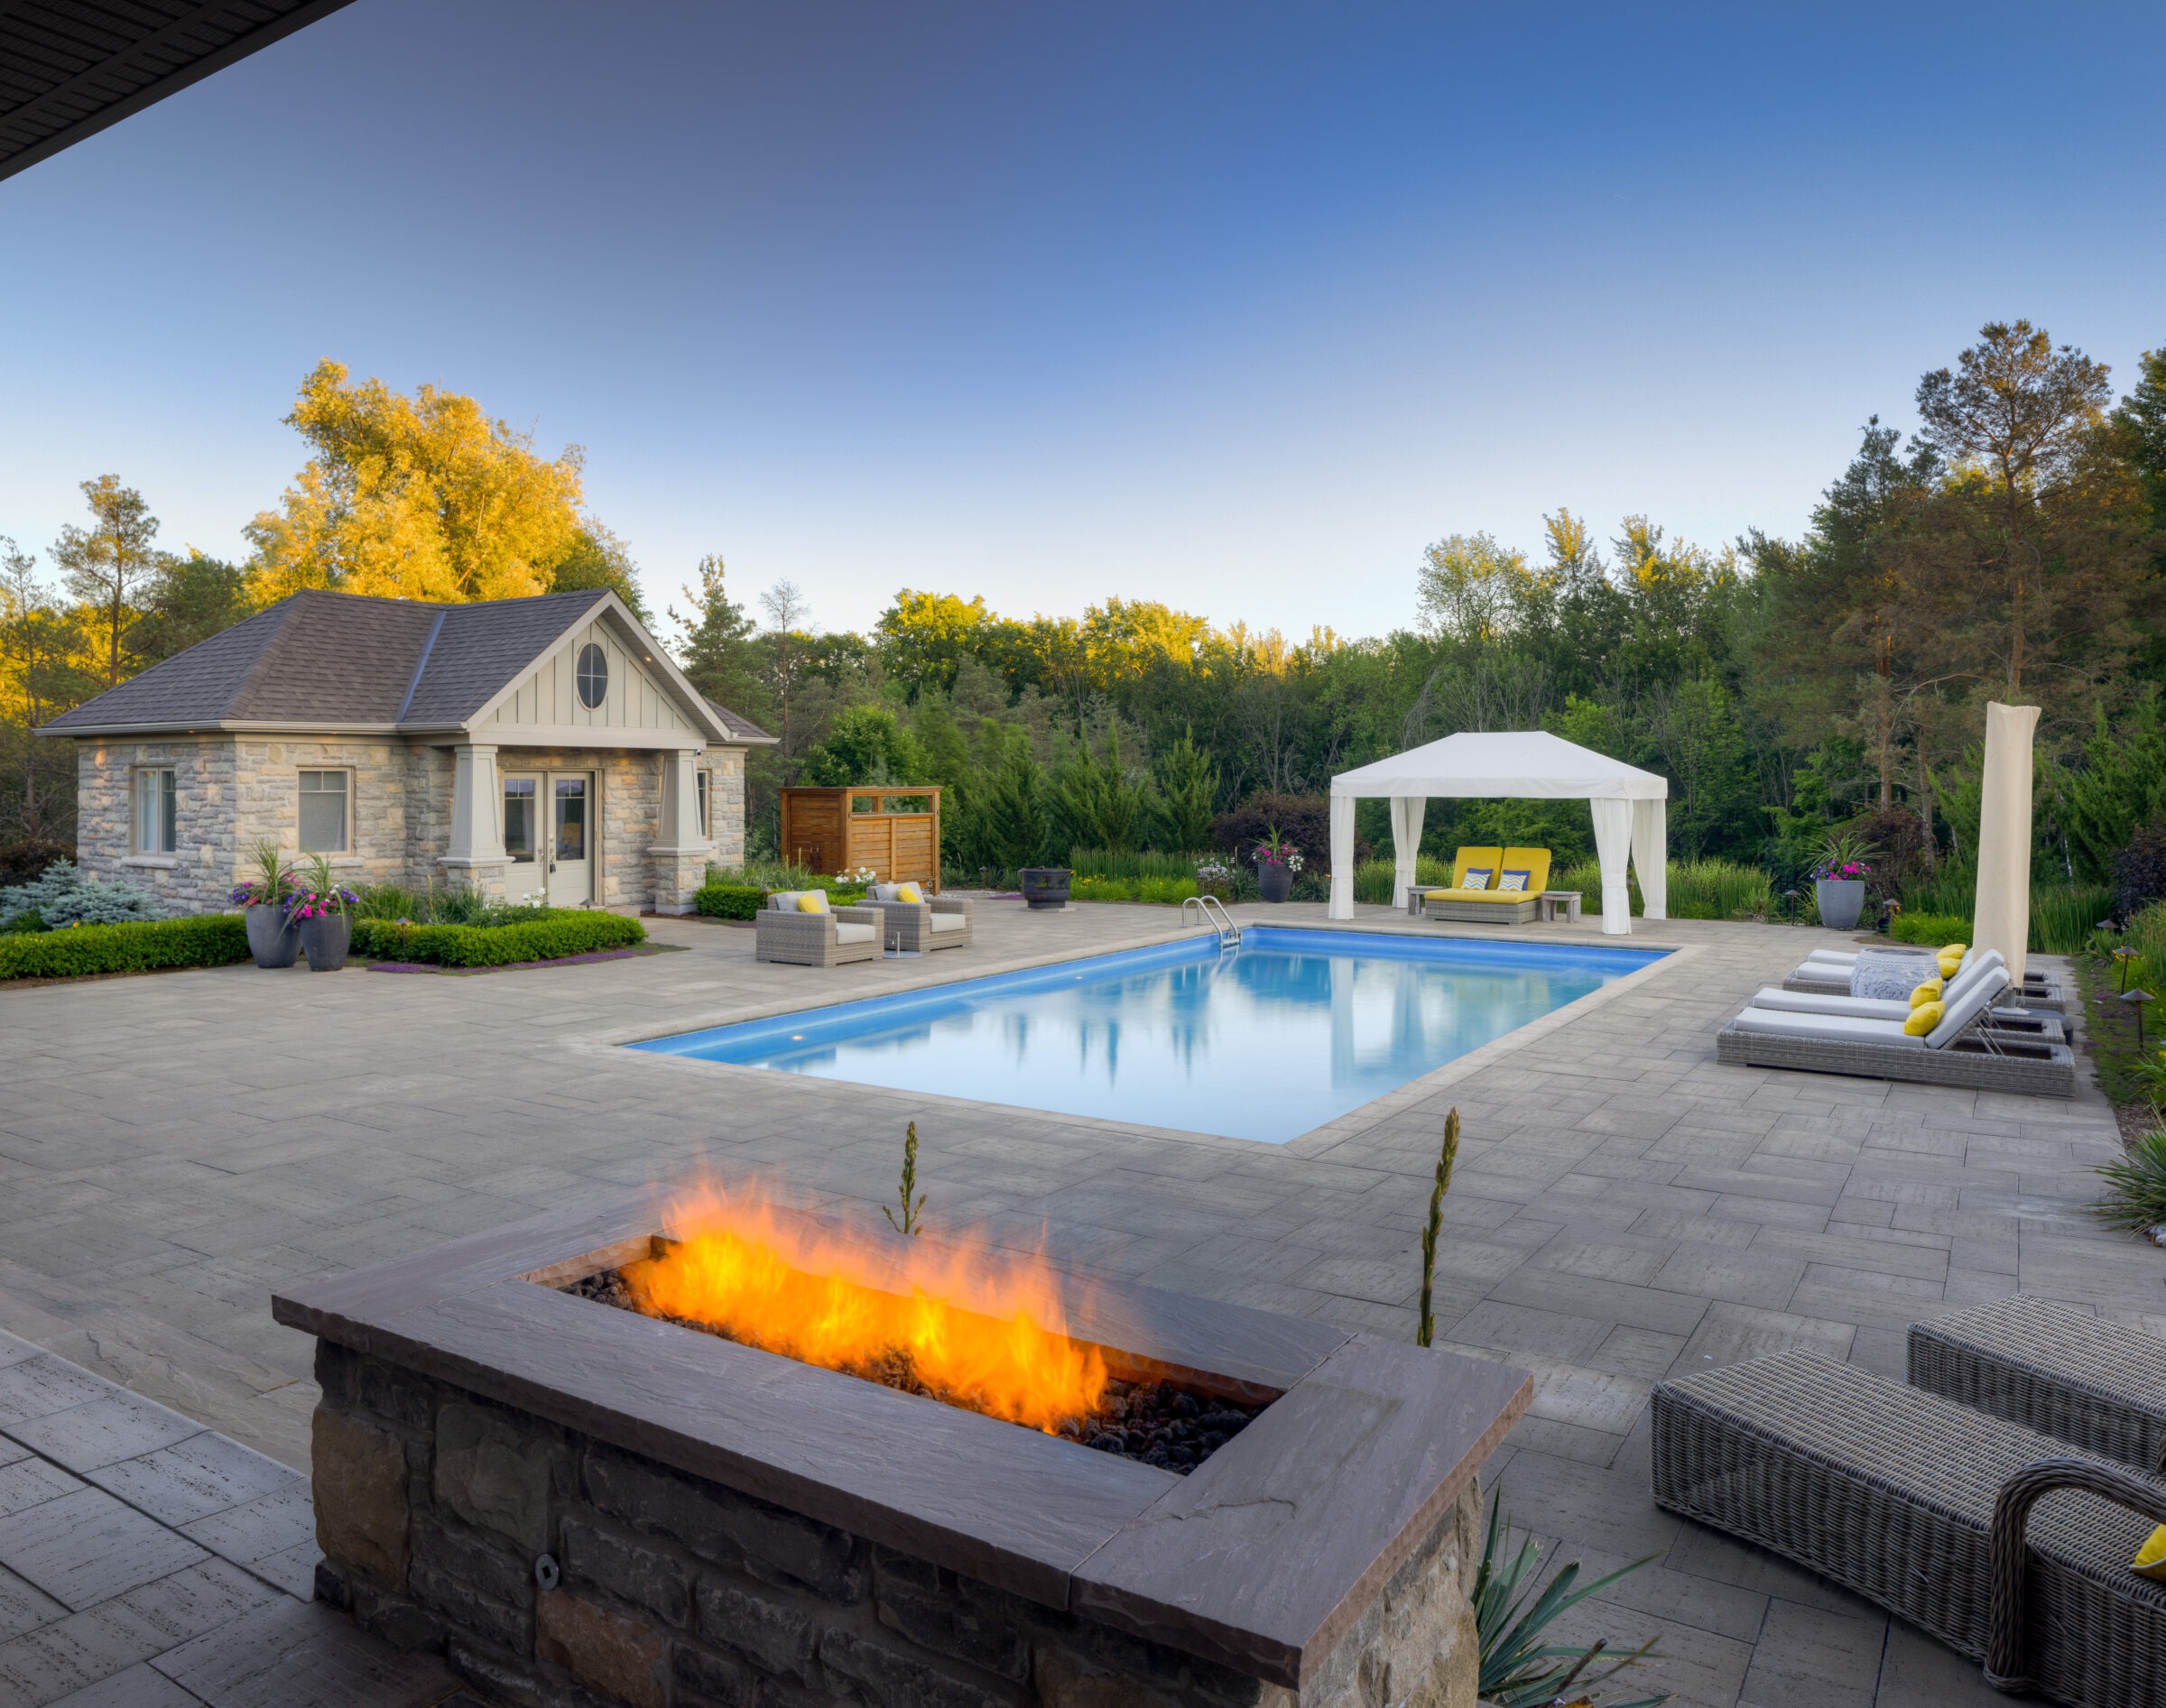 A luxurious backyard with a large swimming pool, gazebo, outdoor furniture, and a fire feature, flanked by a lush forest and a stone-clad house.